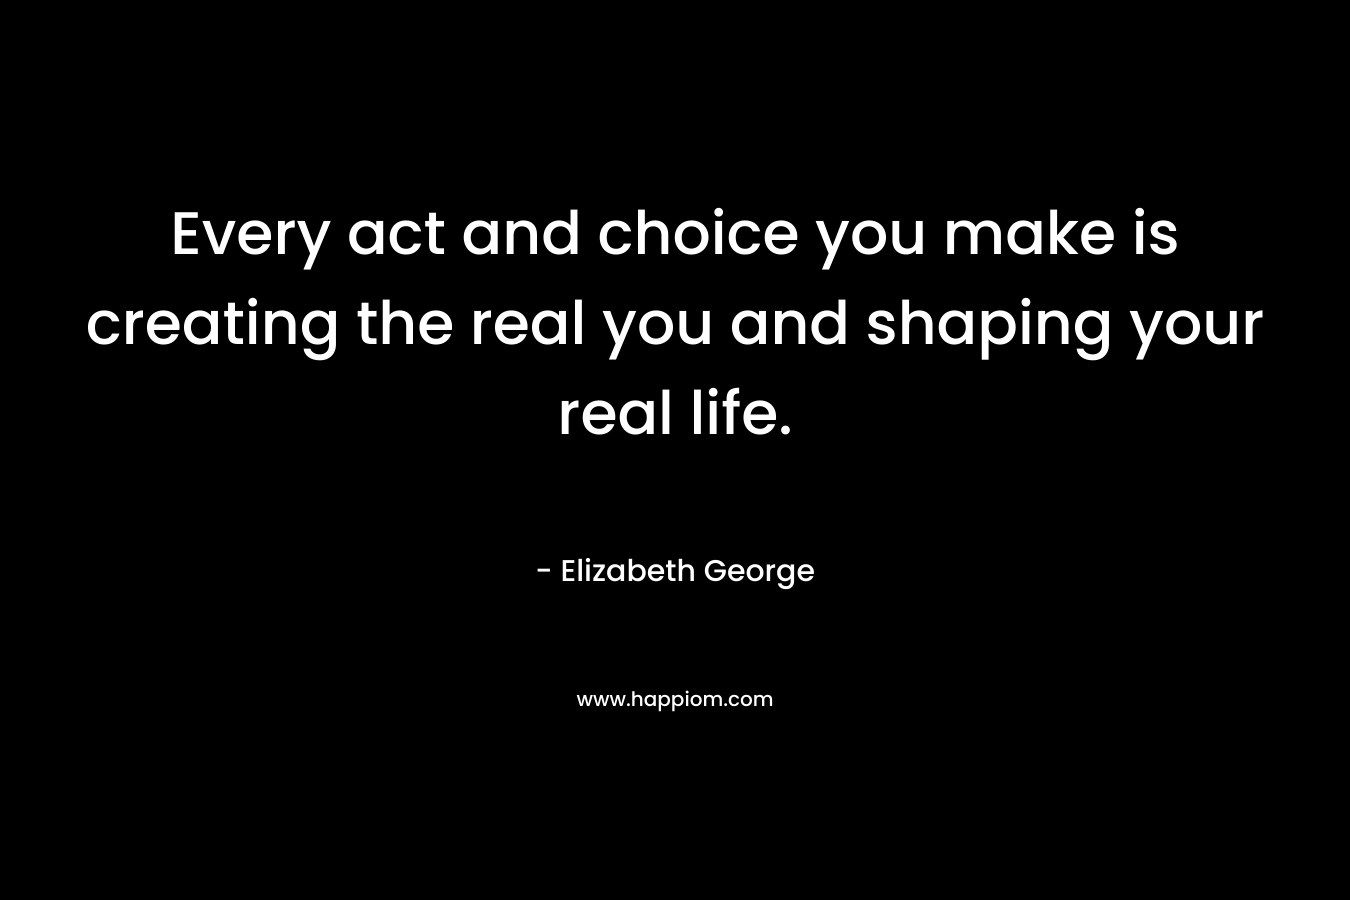 Every act and choice you make is creating the real you and shaping your real life. – Elizabeth George